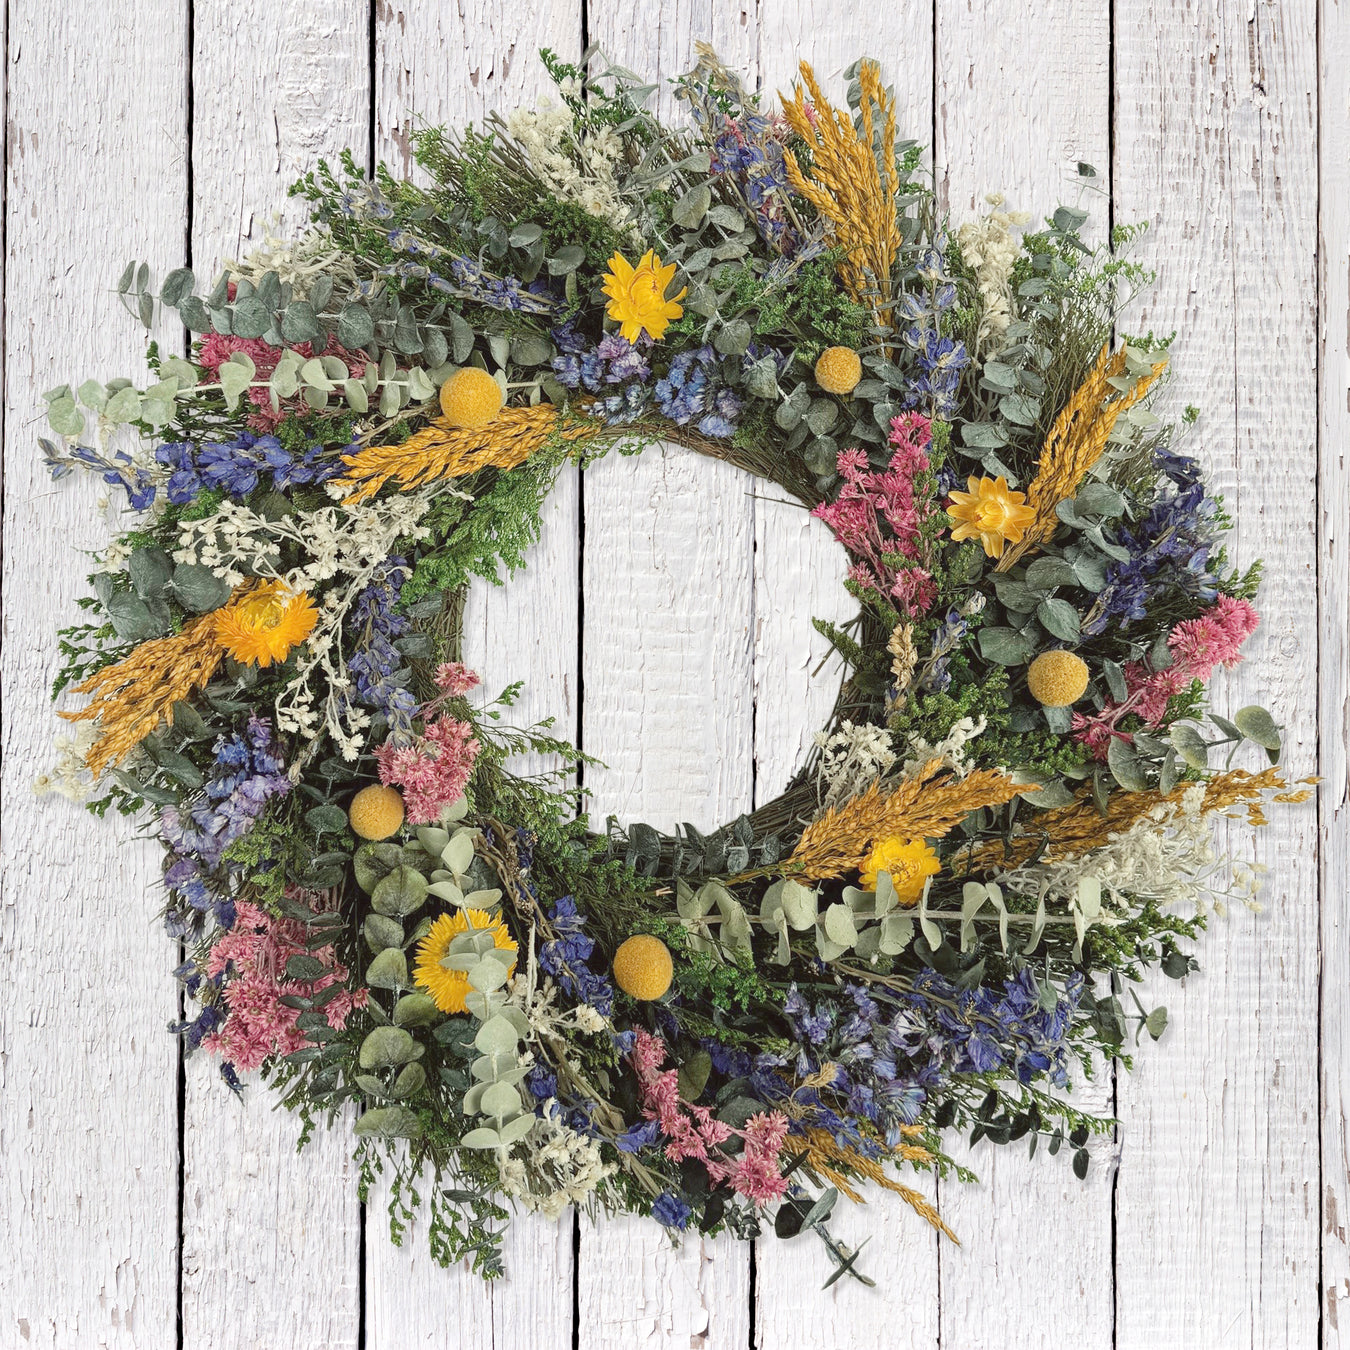 Colorful wreath made of natural botanicals such as baby eucalyptus, straw flowers, and sorghum.